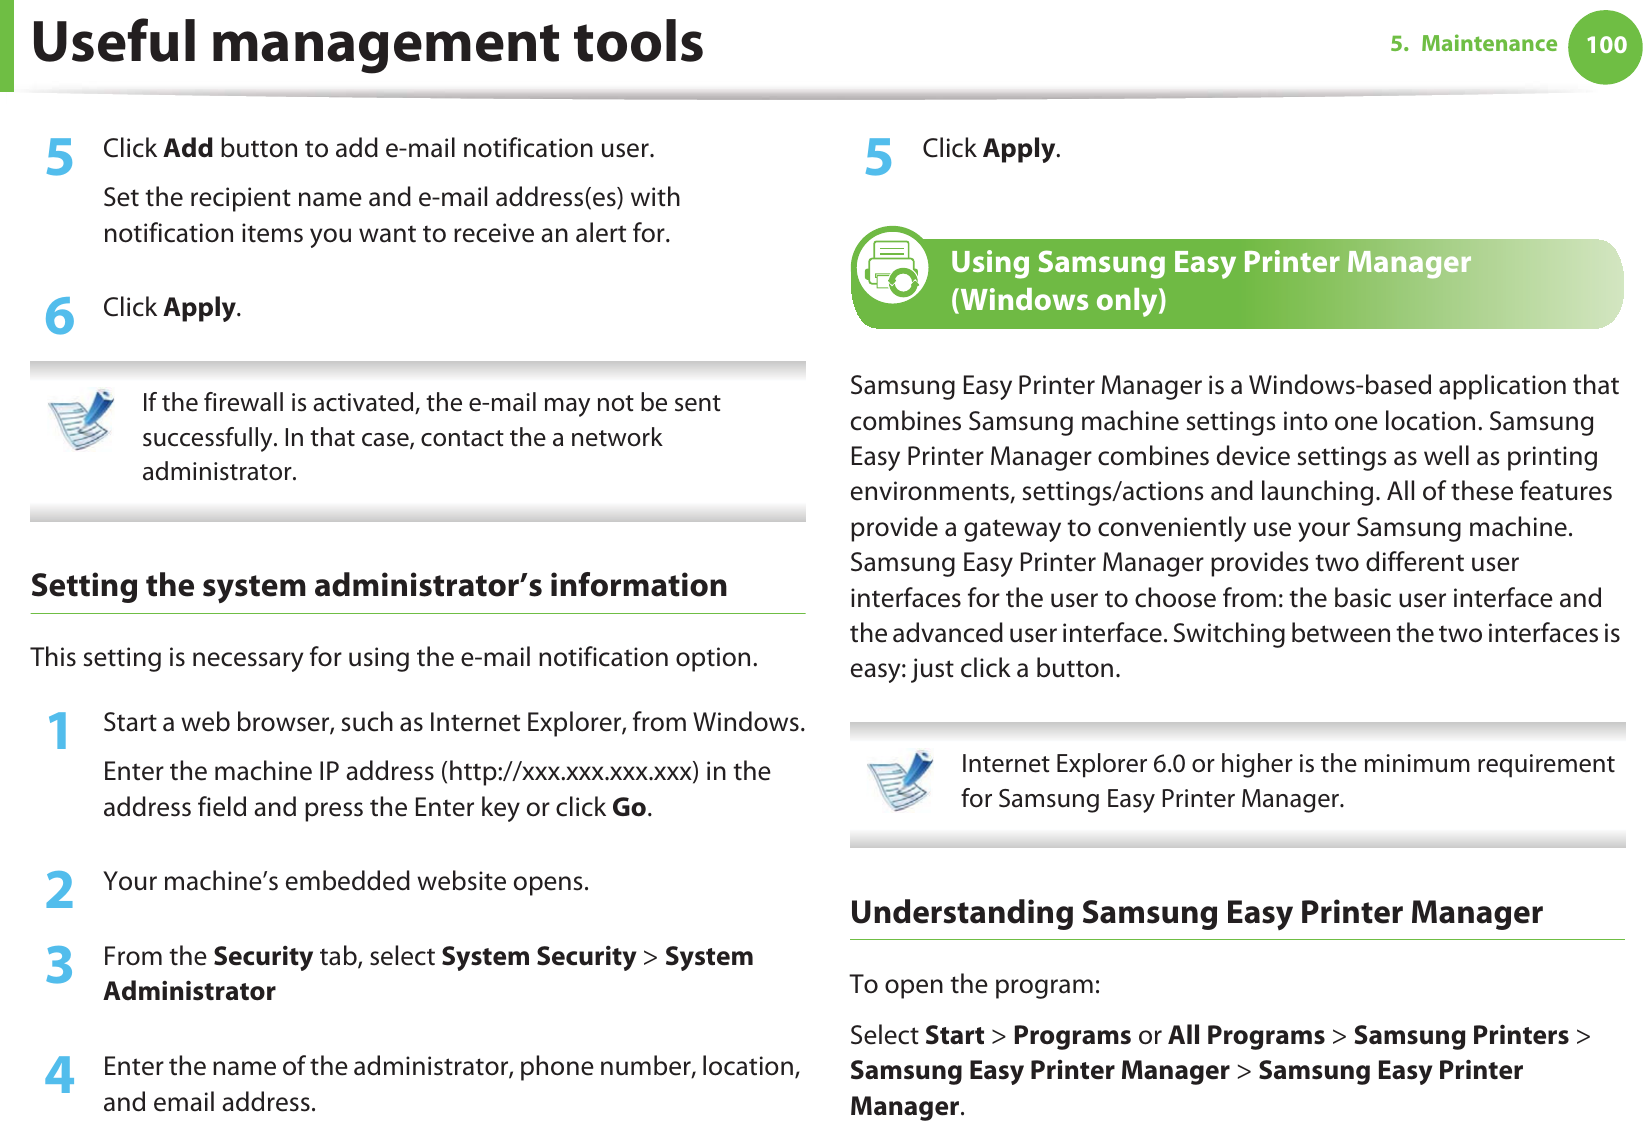 Useful management tools 1005. Maintenance5  Click Add button to add e-mail notification user. Set the recipient name and e-mail address(es) with notification items you want to receive an alert for.6  Click Apply. If the firewall is activated, the e-mail may not be sent successfully. In that case, contact the a network administrator. Setting the system administrator’s informationThis setting is necessary for using the e-mail notification option.1Start a web browser, such as Internet Explorer, from Windows.Enter the machine IP address (http://xxx.xxx.xxx.xxx) in the address field and press the Enter key or click Go.2  Your machine’s embedded website opens.3  From the Security tab, select System Security &gt; System Administrator4  Enter the name of the administrator, phone number, location, and email address. 5  Click Apply. 7 Using Samsung Easy Printer Manager (Windows only)Samsung Easy Printer Manager is a Windows-based application that combines Samsung machine settings into one location. Samsung Easy Printer Manager combines device settings as well as printing environments, settings/actions and launching. All of these features provide a gateway to conveniently use your Samsung machine. Samsung Easy Printer Manager provides two different user interfaces for the user to choose from: the basic user interface and the advanced user interface. Switching between the two interfaces is easy: just click a button. Internet Explorer 6.0 or higher is the minimum requirement for Samsung Easy Printer Manager. Understanding Samsung Easy Printer ManagerTo open the program: Select Start &gt; Programs or All Programs &gt; Samsung Printers &gt; Samsung Easy Printer Manager &gt; Samsung Easy Printer Manager.